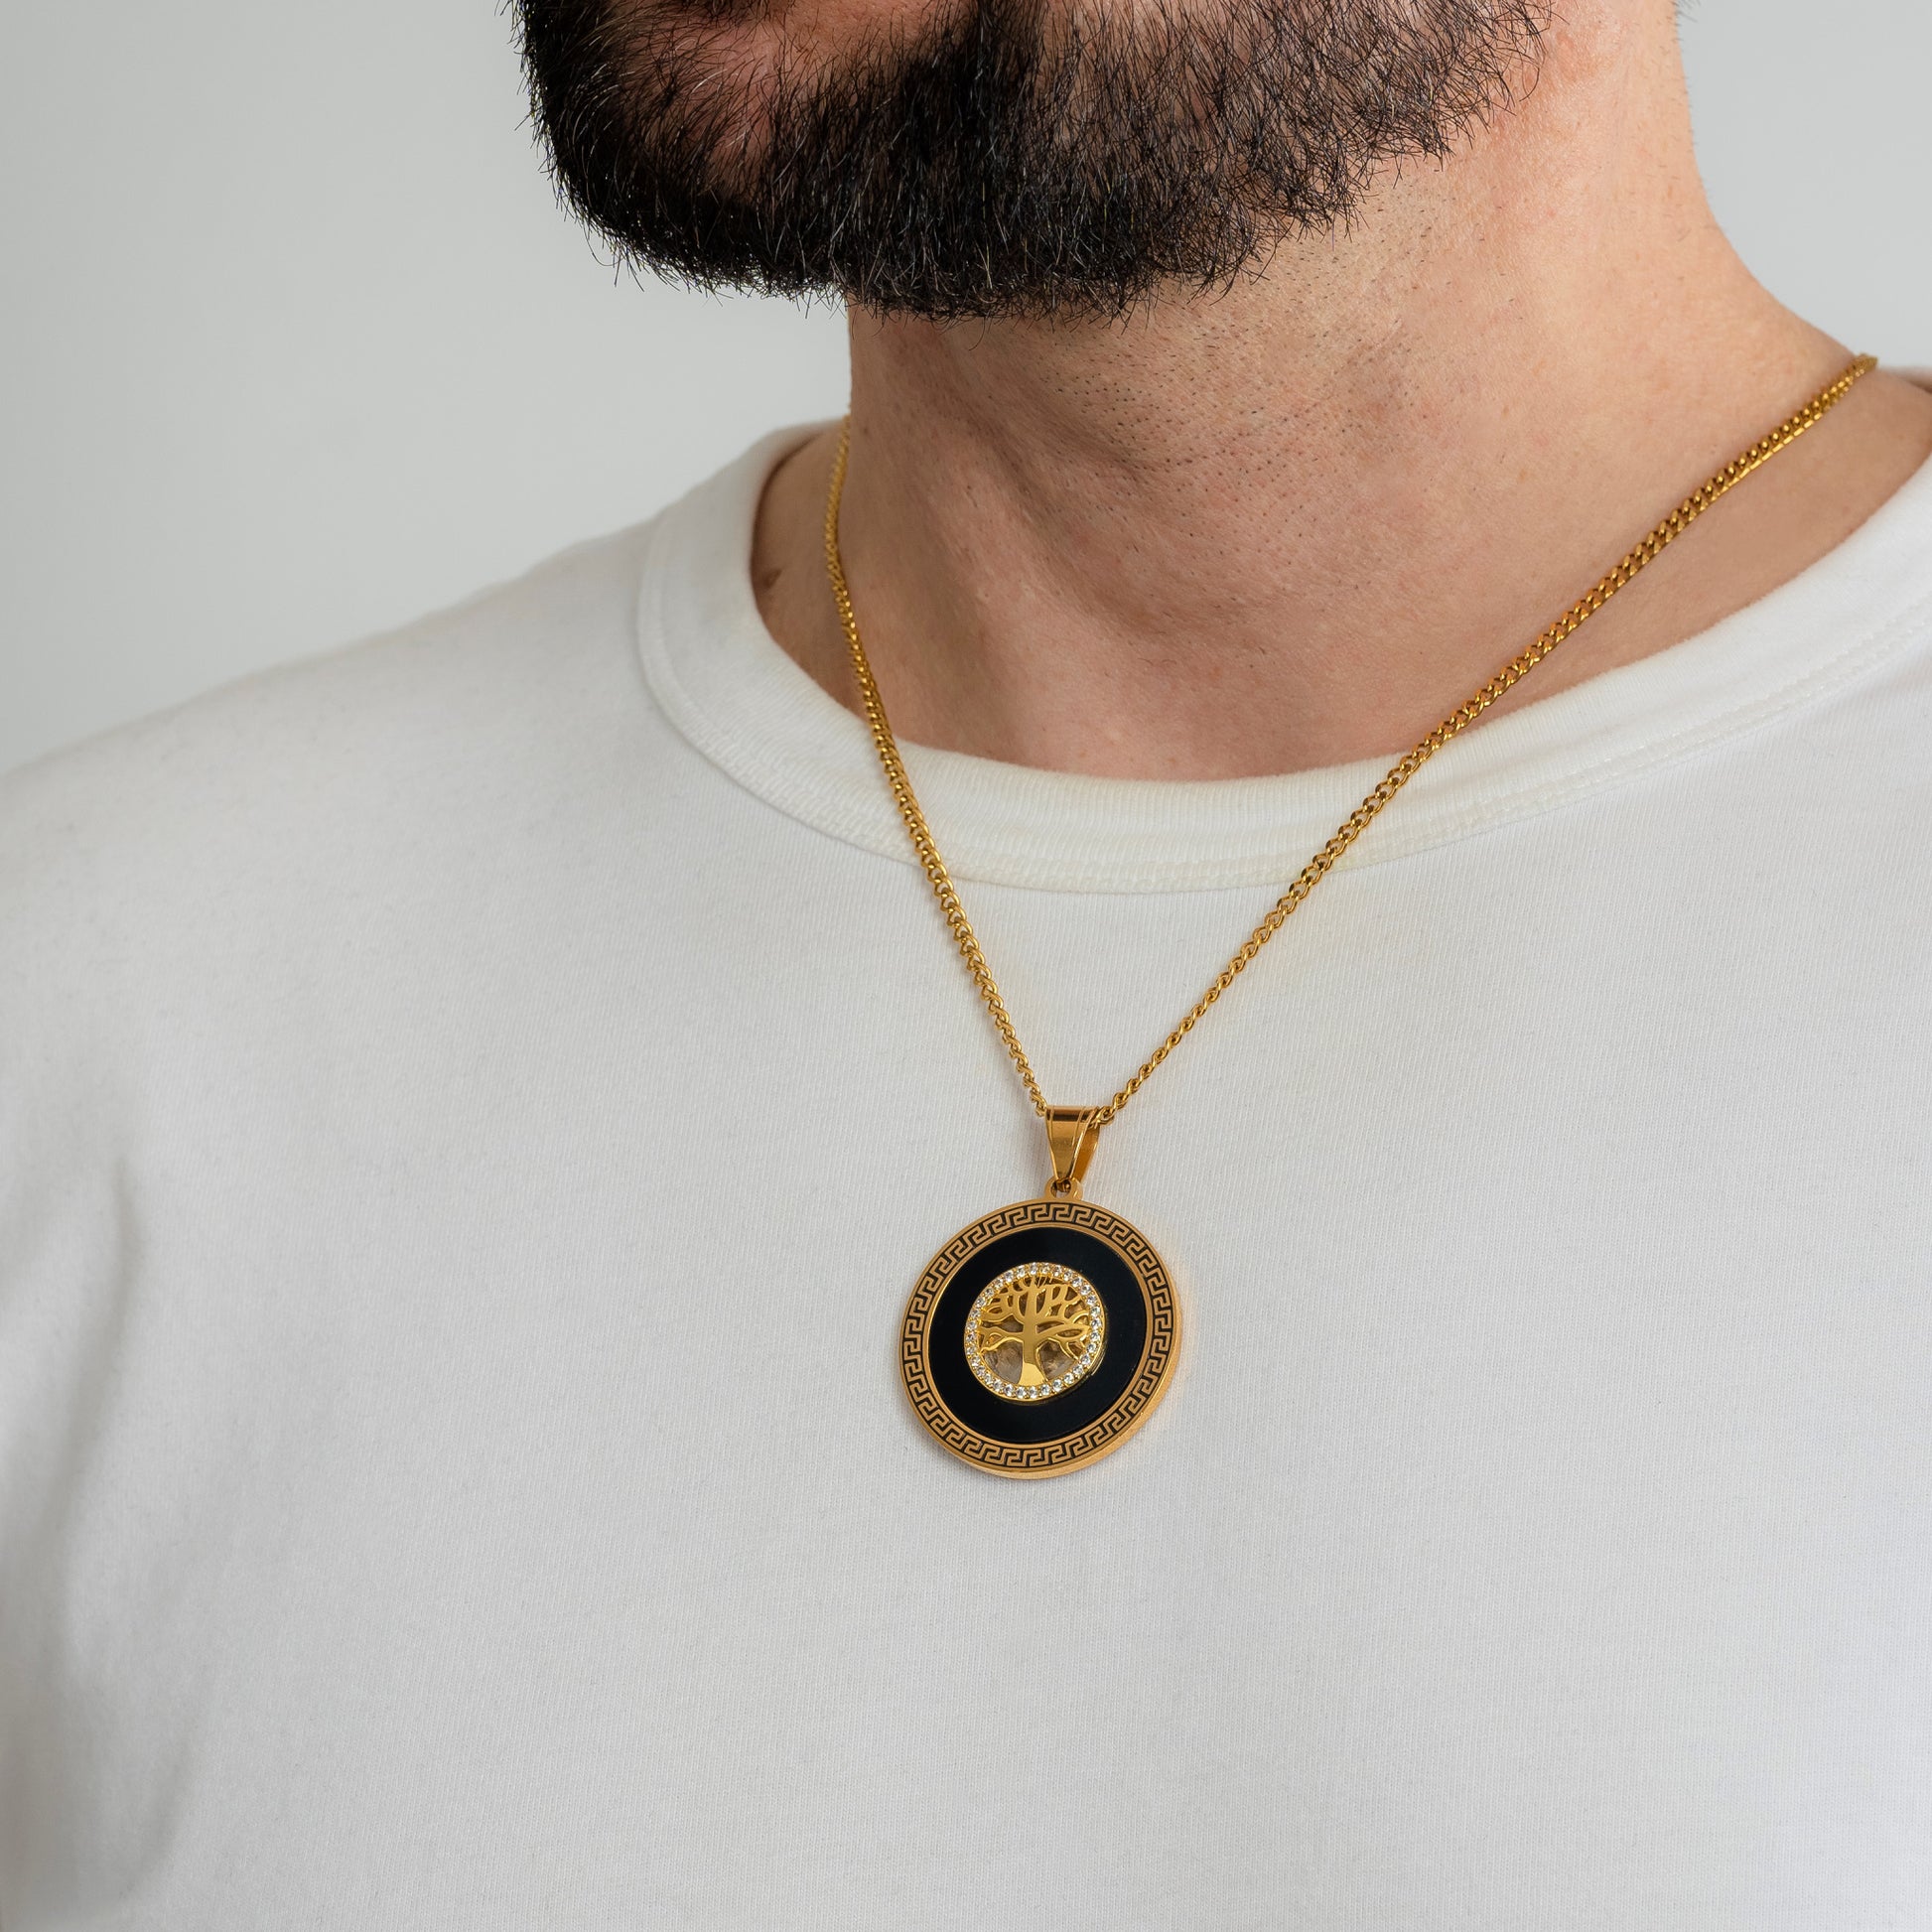 A male model in a white t-shirt wearing an Iced Tree of Life Gold Pendant with a 3mm Micro Cuban chain 22 inches. Close-up image of the non-tarnish, waterproof trending men's necklace with Cubic Zirconia inlays.